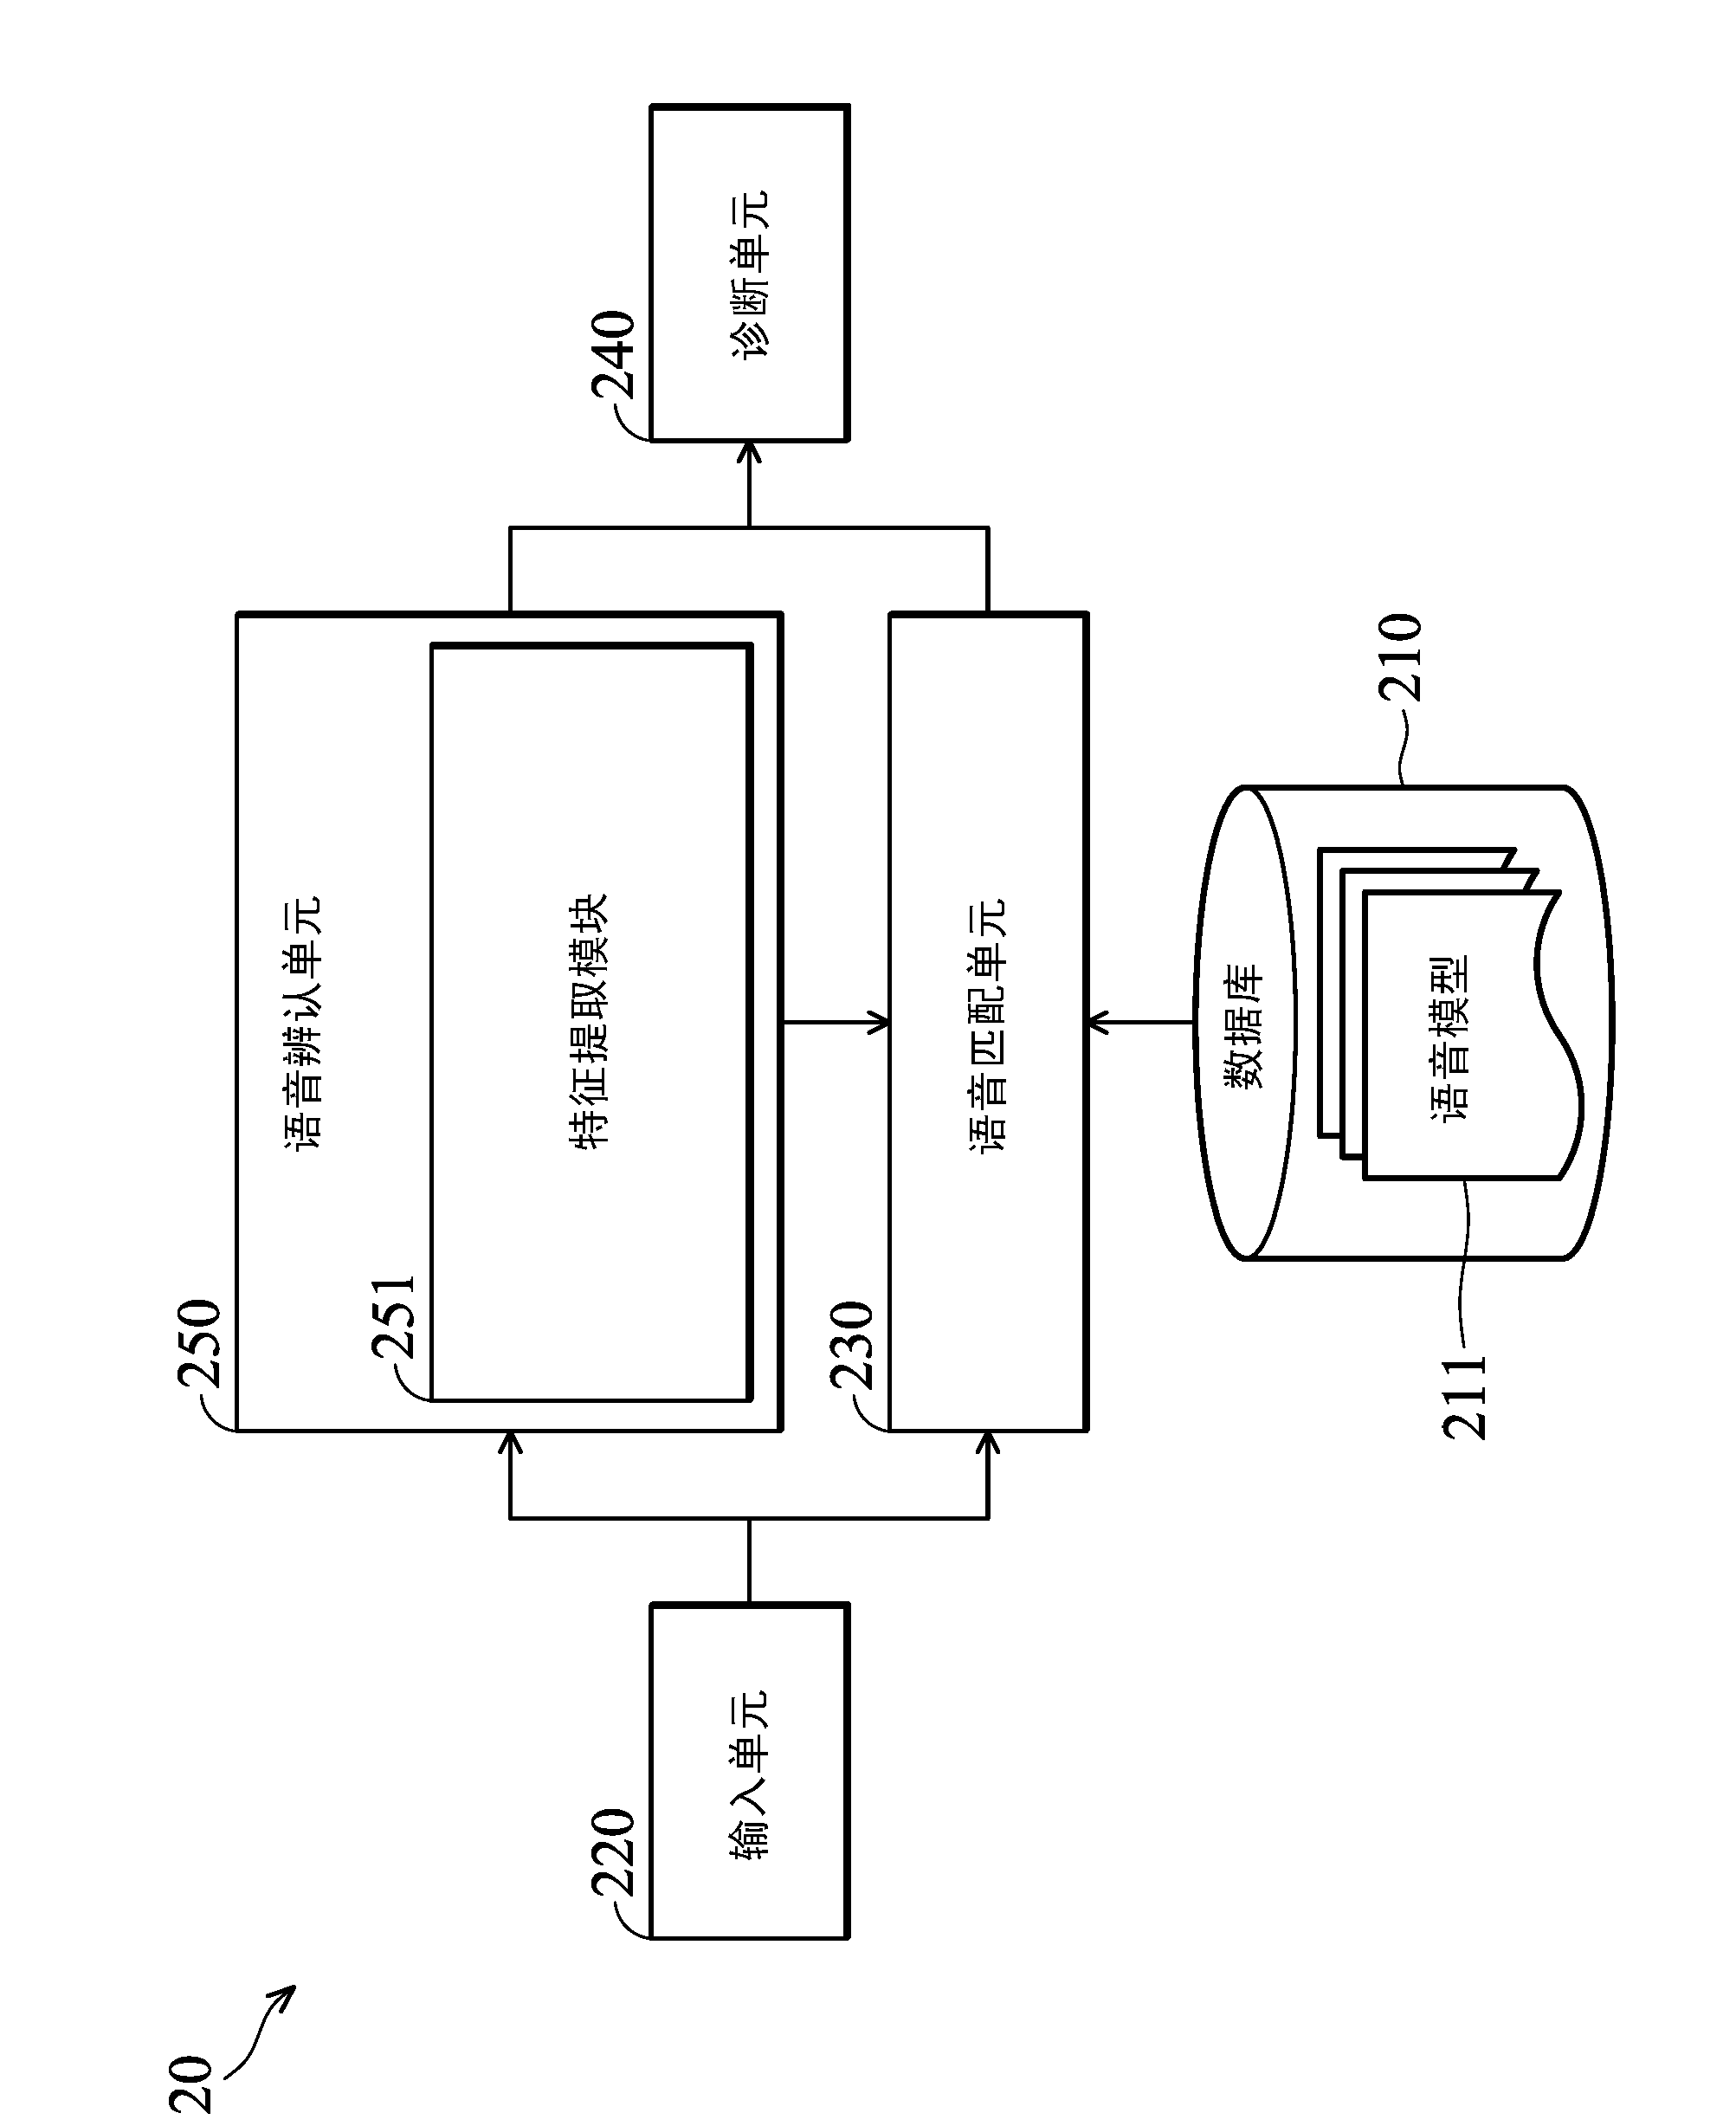 Apparatus and method for voice assisted medical diagnosis